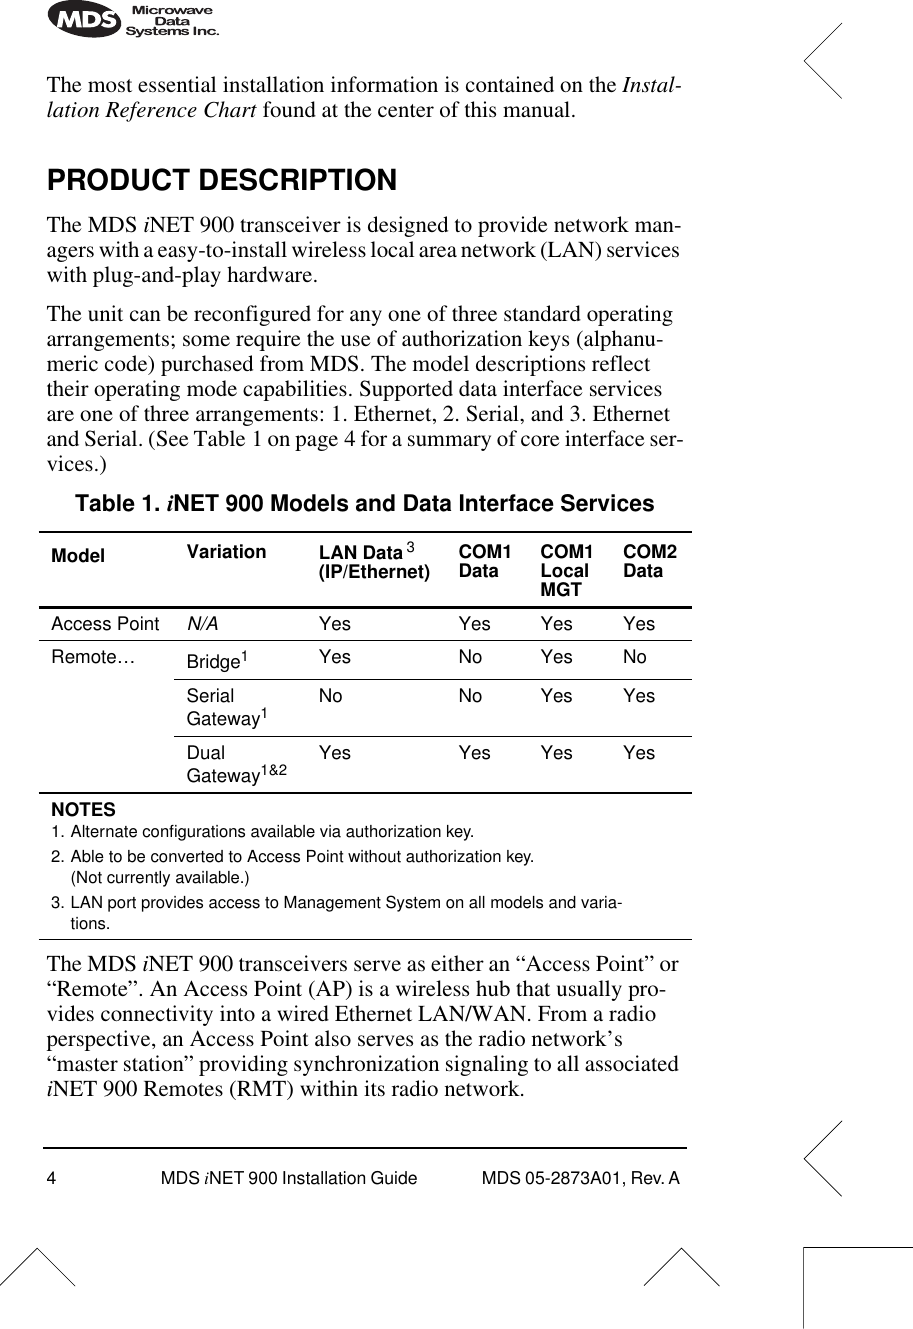  4 MDS  i NET 900 Installation Guide  MDS 05-2873A01, Rev. A  The most essential installation information is contained on the  Instal-lation Reference Chart  found at the center of this manual. PRODUCT DESCRIPTION The MDS  i NET 900 transceiver is designed to provide network man-agers with a easy-to-install wireless local area network (LAN) services with plug-and-play hardware.The unit can be reconfigured for any one of three standard operating arrangements; some require the use of authorization keys (alphanu-meric code) purchased from MDS. The model descriptions reflect their operating mode capabilities. Supported data interface services are one of three arrangements: 1. Ethernet, 2. Serial, and 3. Ethernet and Serial. (See Table 1 on page 4 for a summary of core interface ser-vices.)The MDS  i NET 900 transceivers serve as either an “Access Point” or “Remote”. An Access Point (AP) is a wireless hub that usually pro-vides connectivity into a wired Ethernet LAN/WAN. From a radio perspective, an Access Point also serves as the radio network’s “master station” providing synchronization signaling to all associated  i NET 900 Remotes (RMT) within its radio network. Table 1.  i NET 900 Models and Data Interface Services Model Variation LAN Data   3 (IP/Ethernet) COM1Data COM1Local MGTCOM2Data Access Point N/A Yes Yes Yes YesRemote… Bridge 1 Yes No Yes NoSerial Gateway 1 No No Yes YesDual Gateway 1&amp;2 Yes Yes Yes Yes NOTES   1. Alternate conﬁgurations available via authorization key.2. Able to be converted to Access Point without authorization key. (Not currently available.)3. LAN port provides access to Management System on all models and varia-tions.